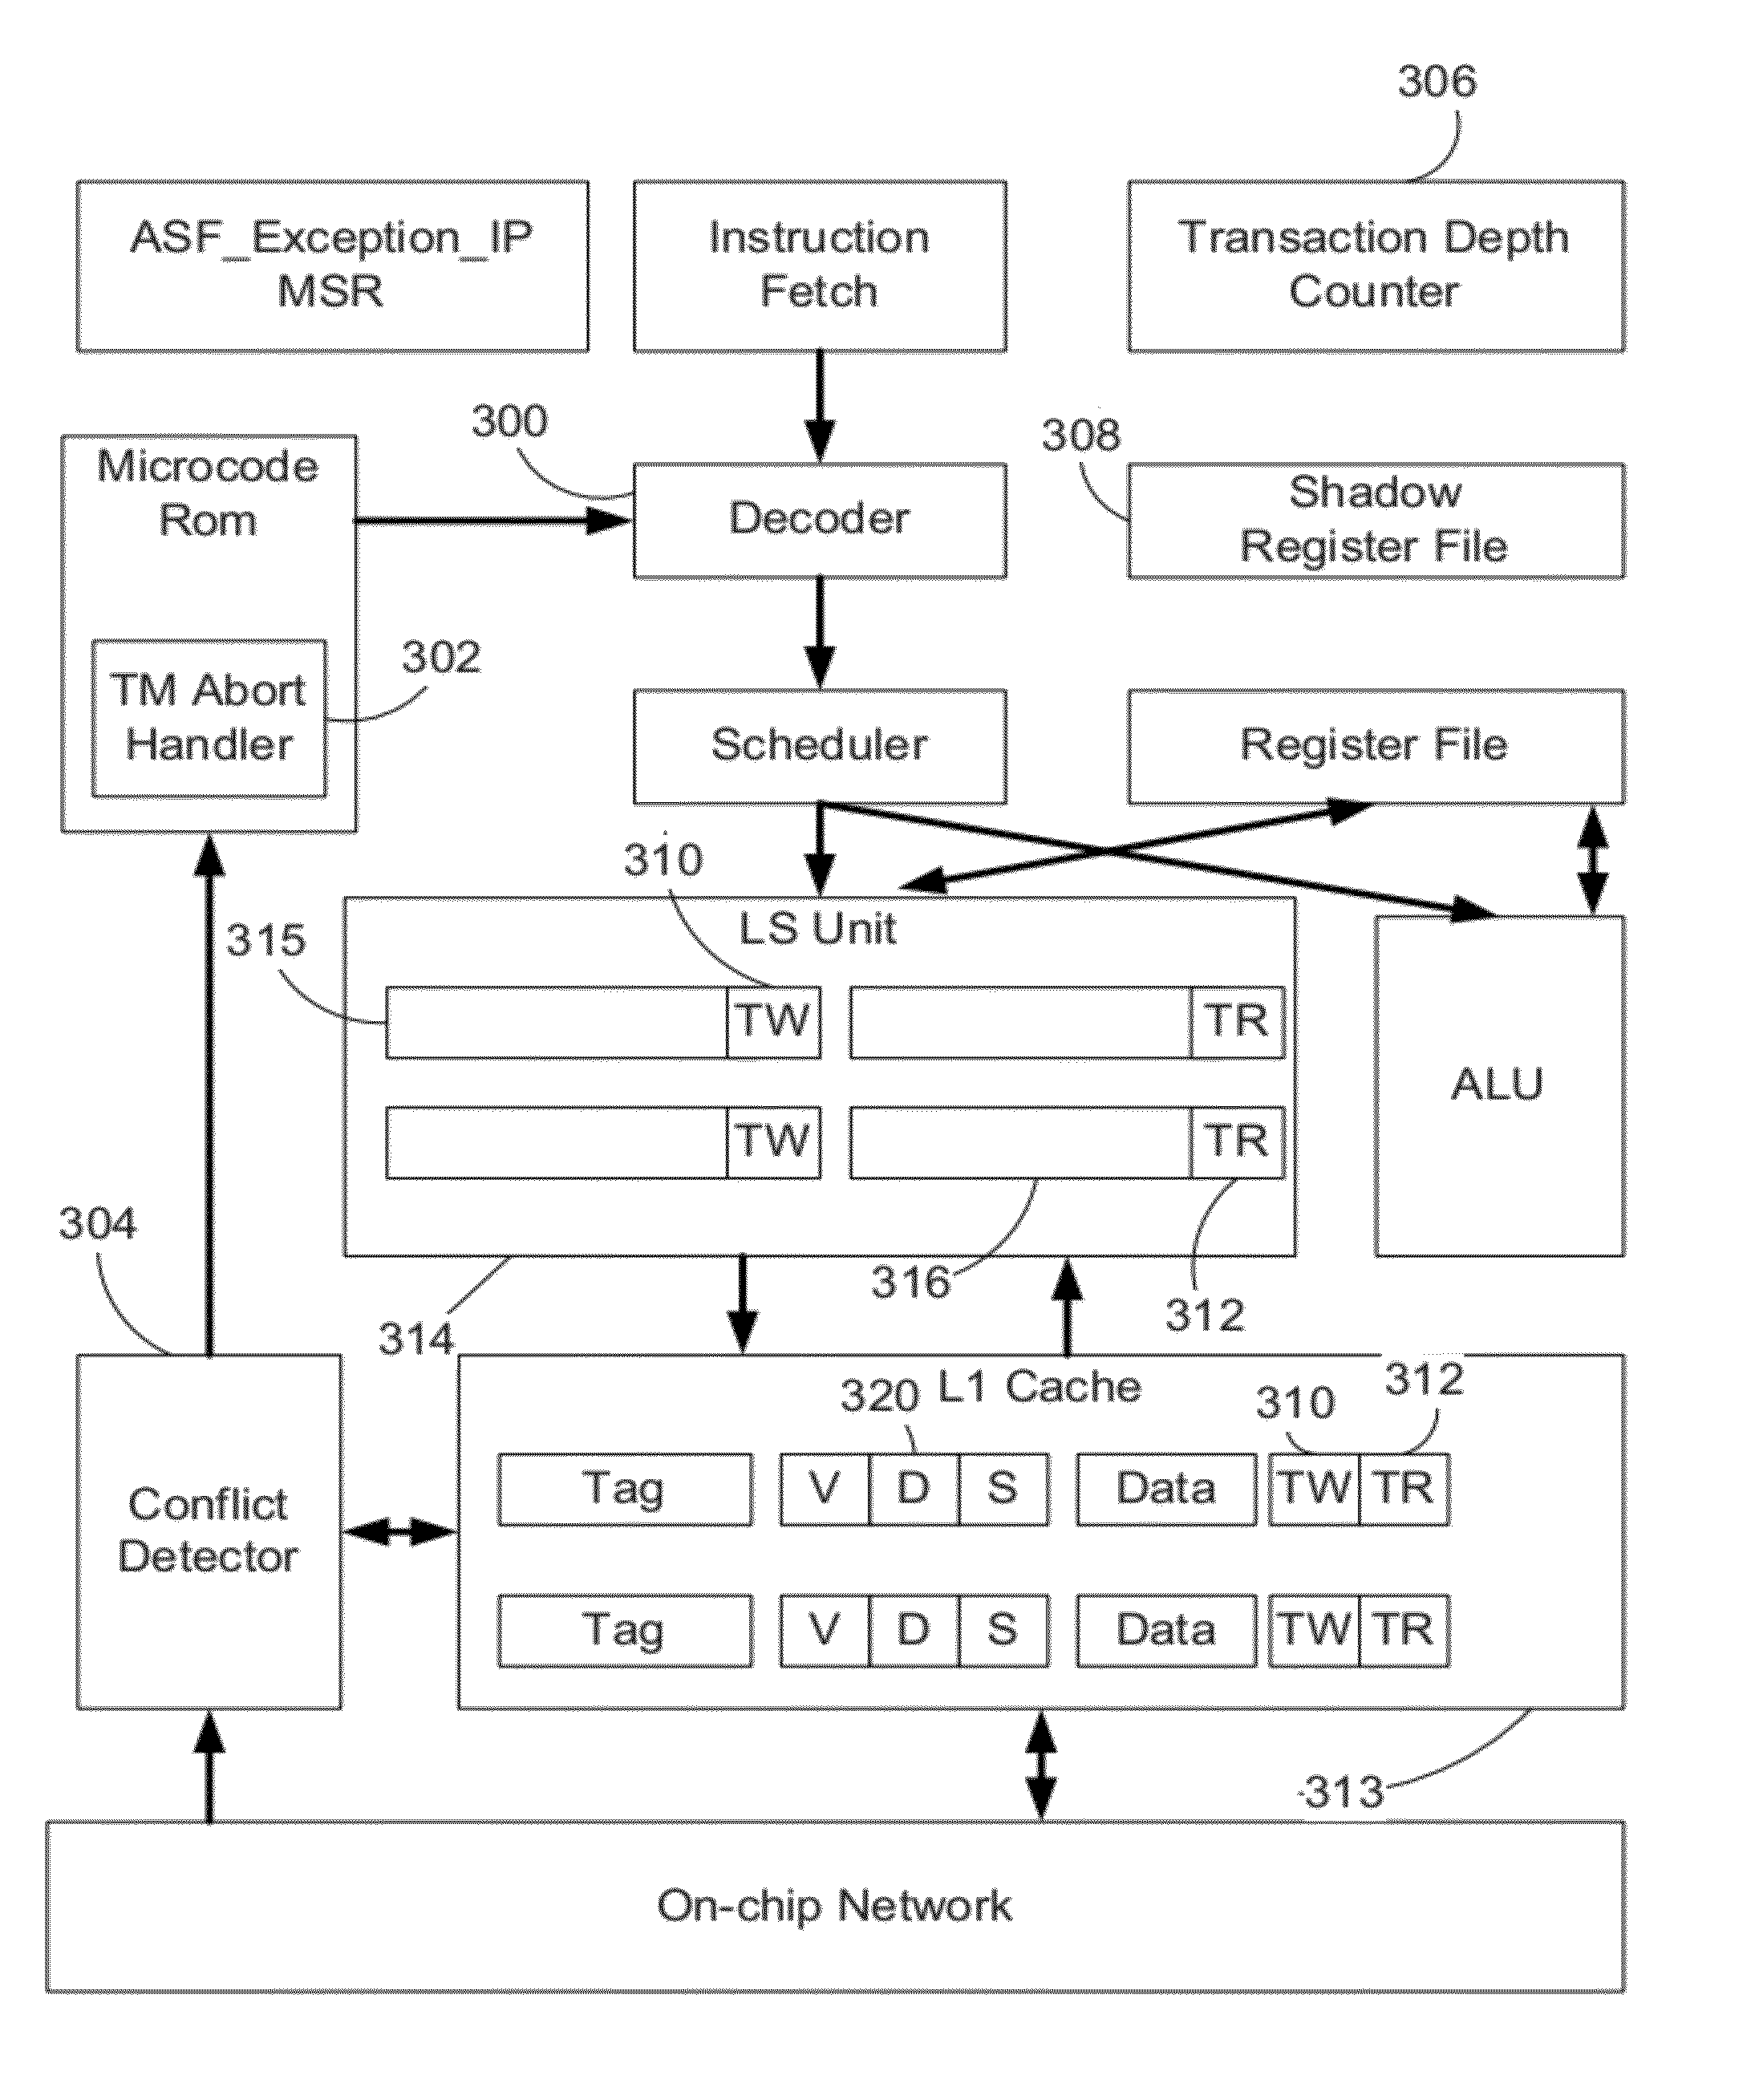 Compiler support technique for hardware transactional memory systems